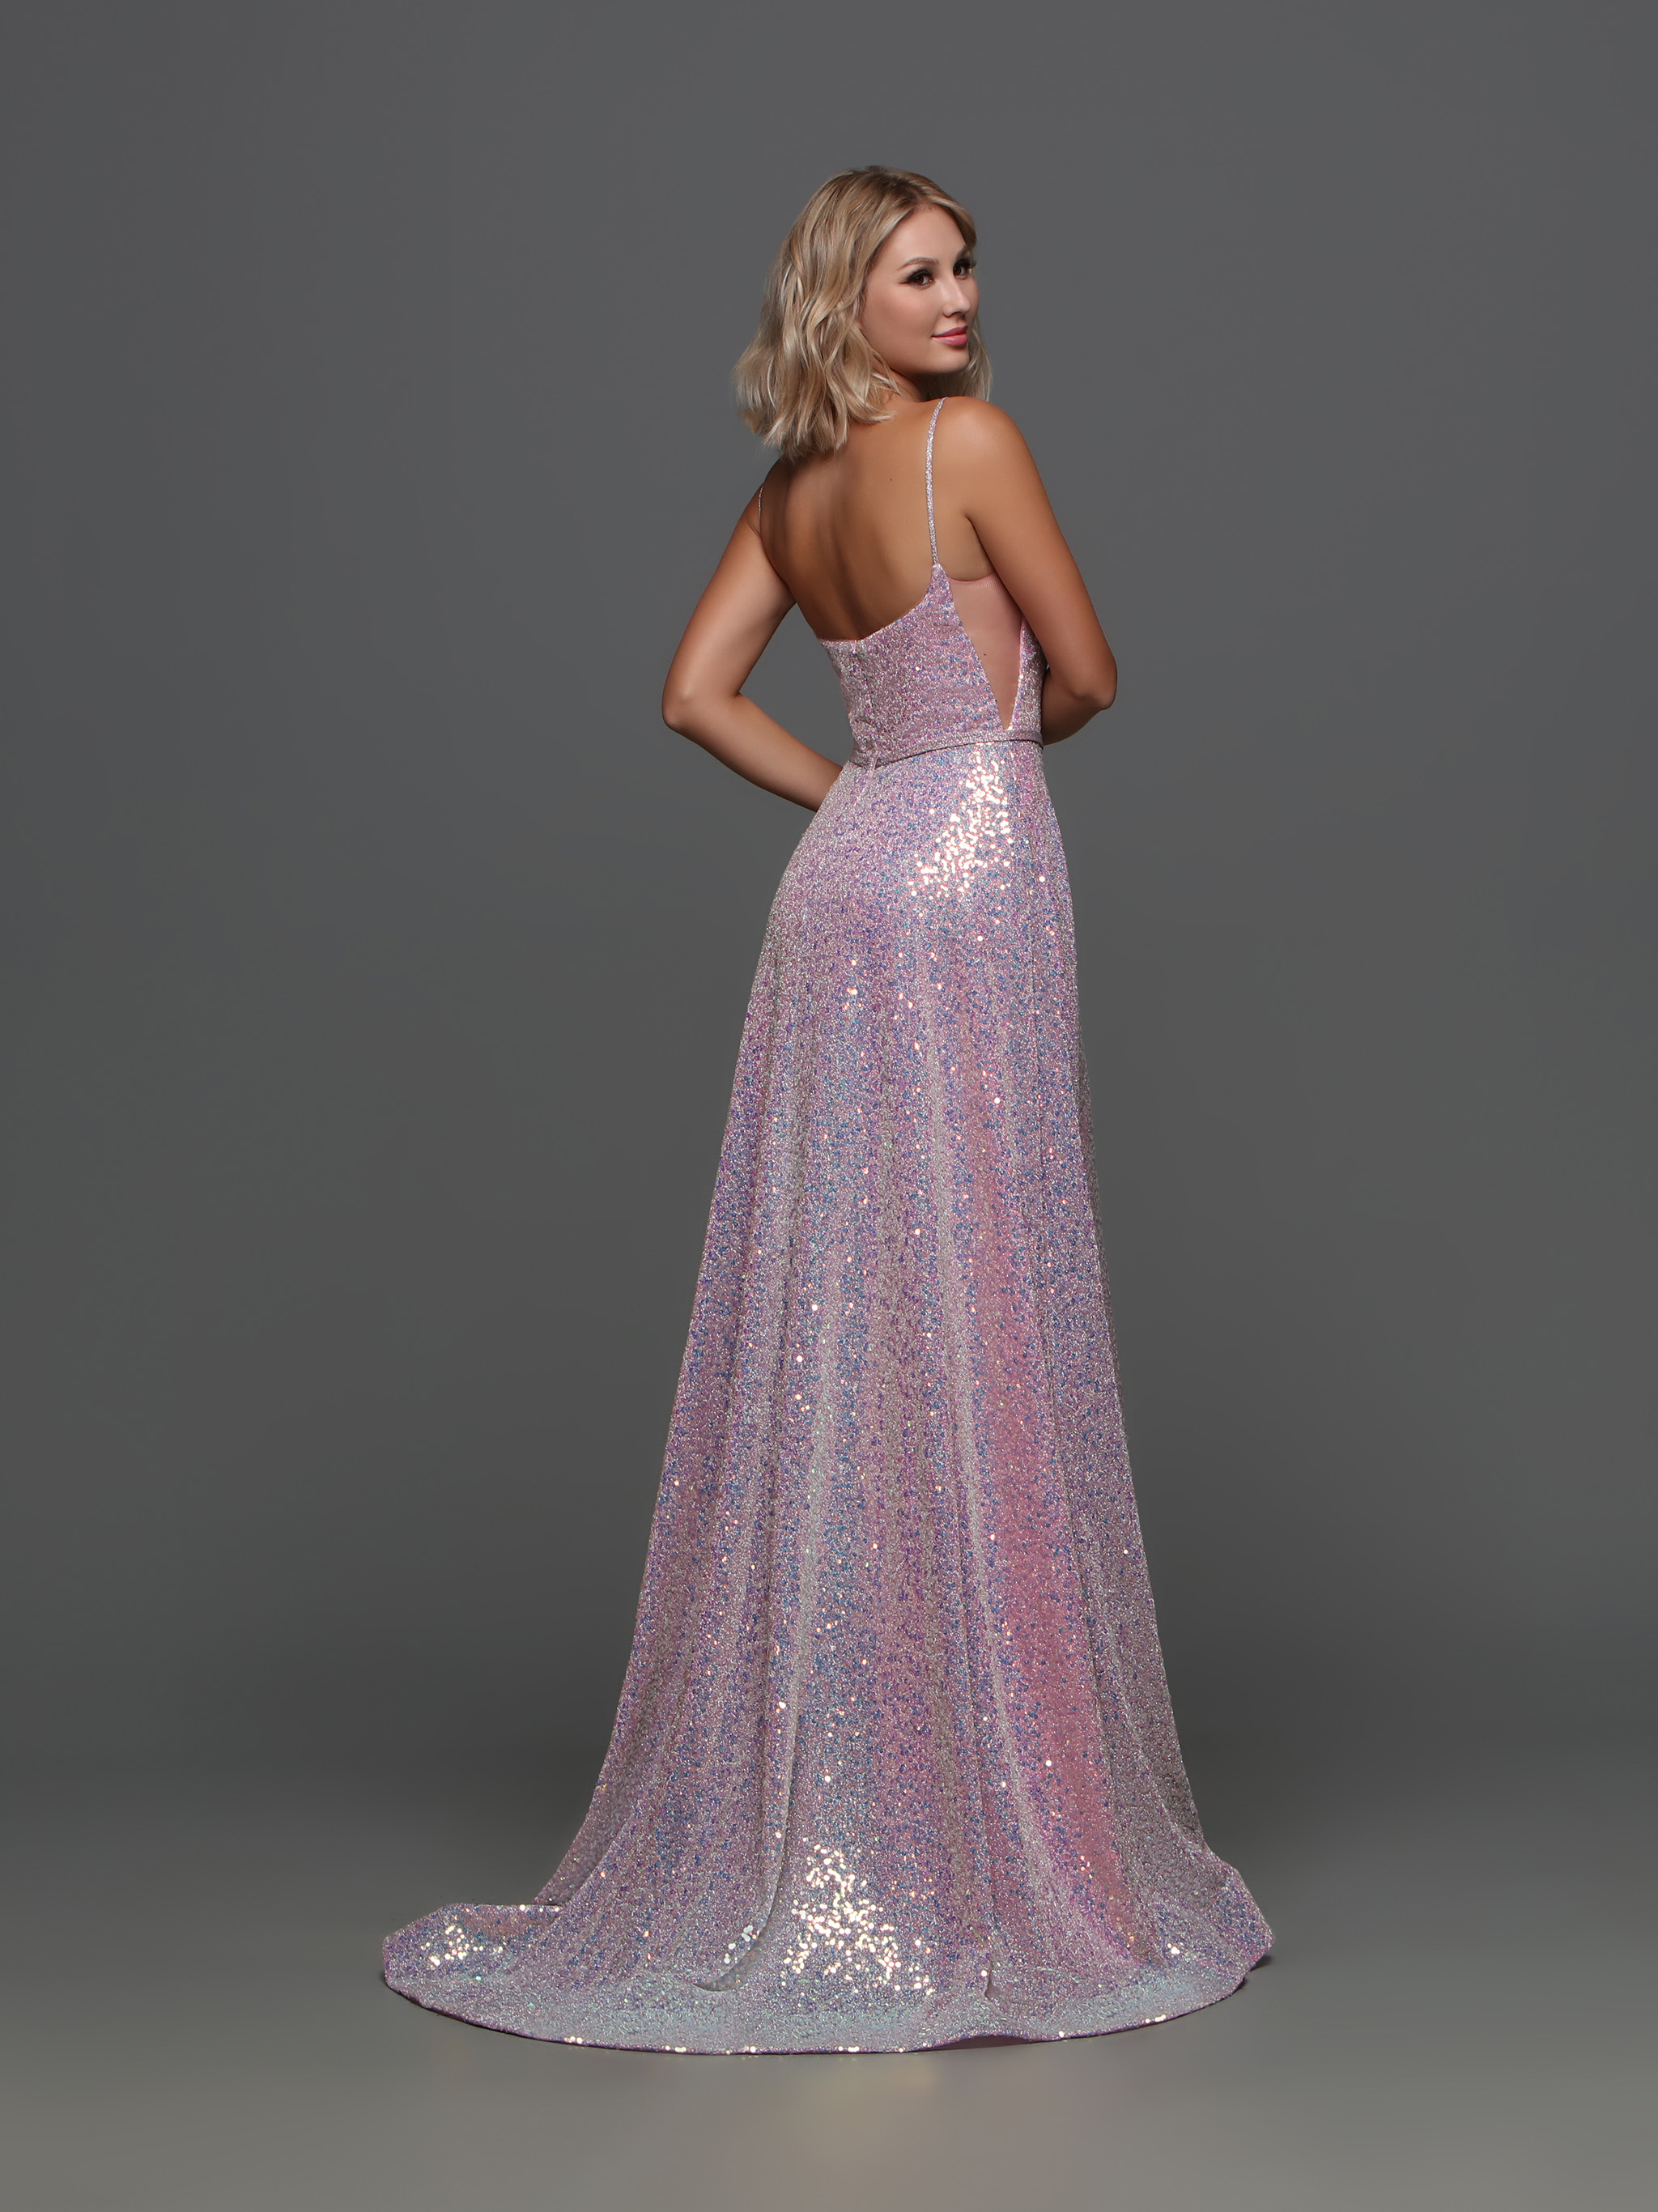 Image showing back view of style #72314